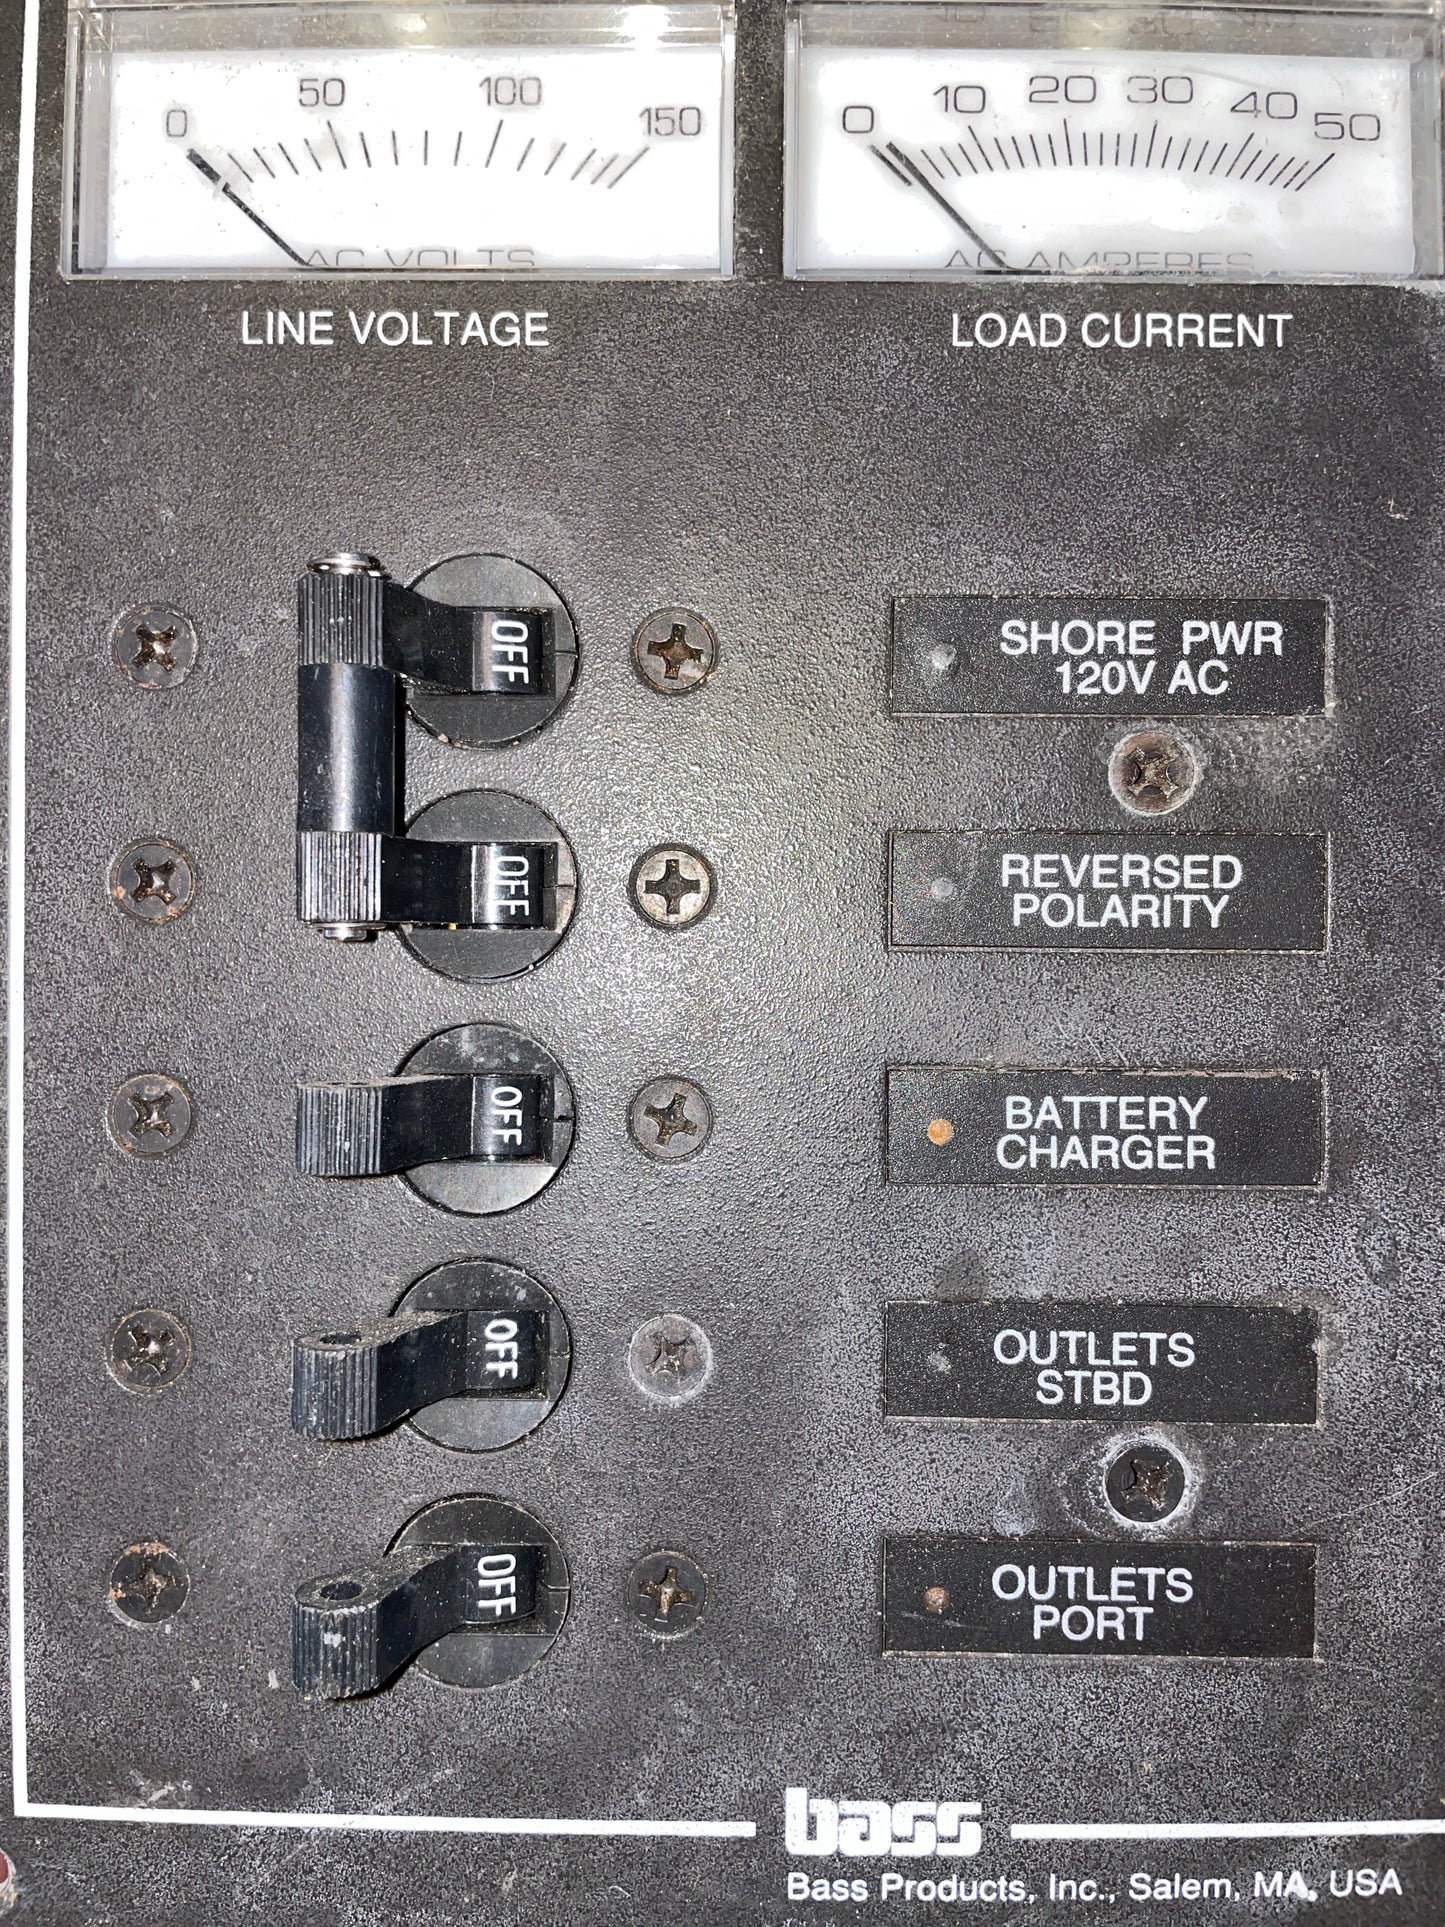 Bass Products AC Power Center Panel